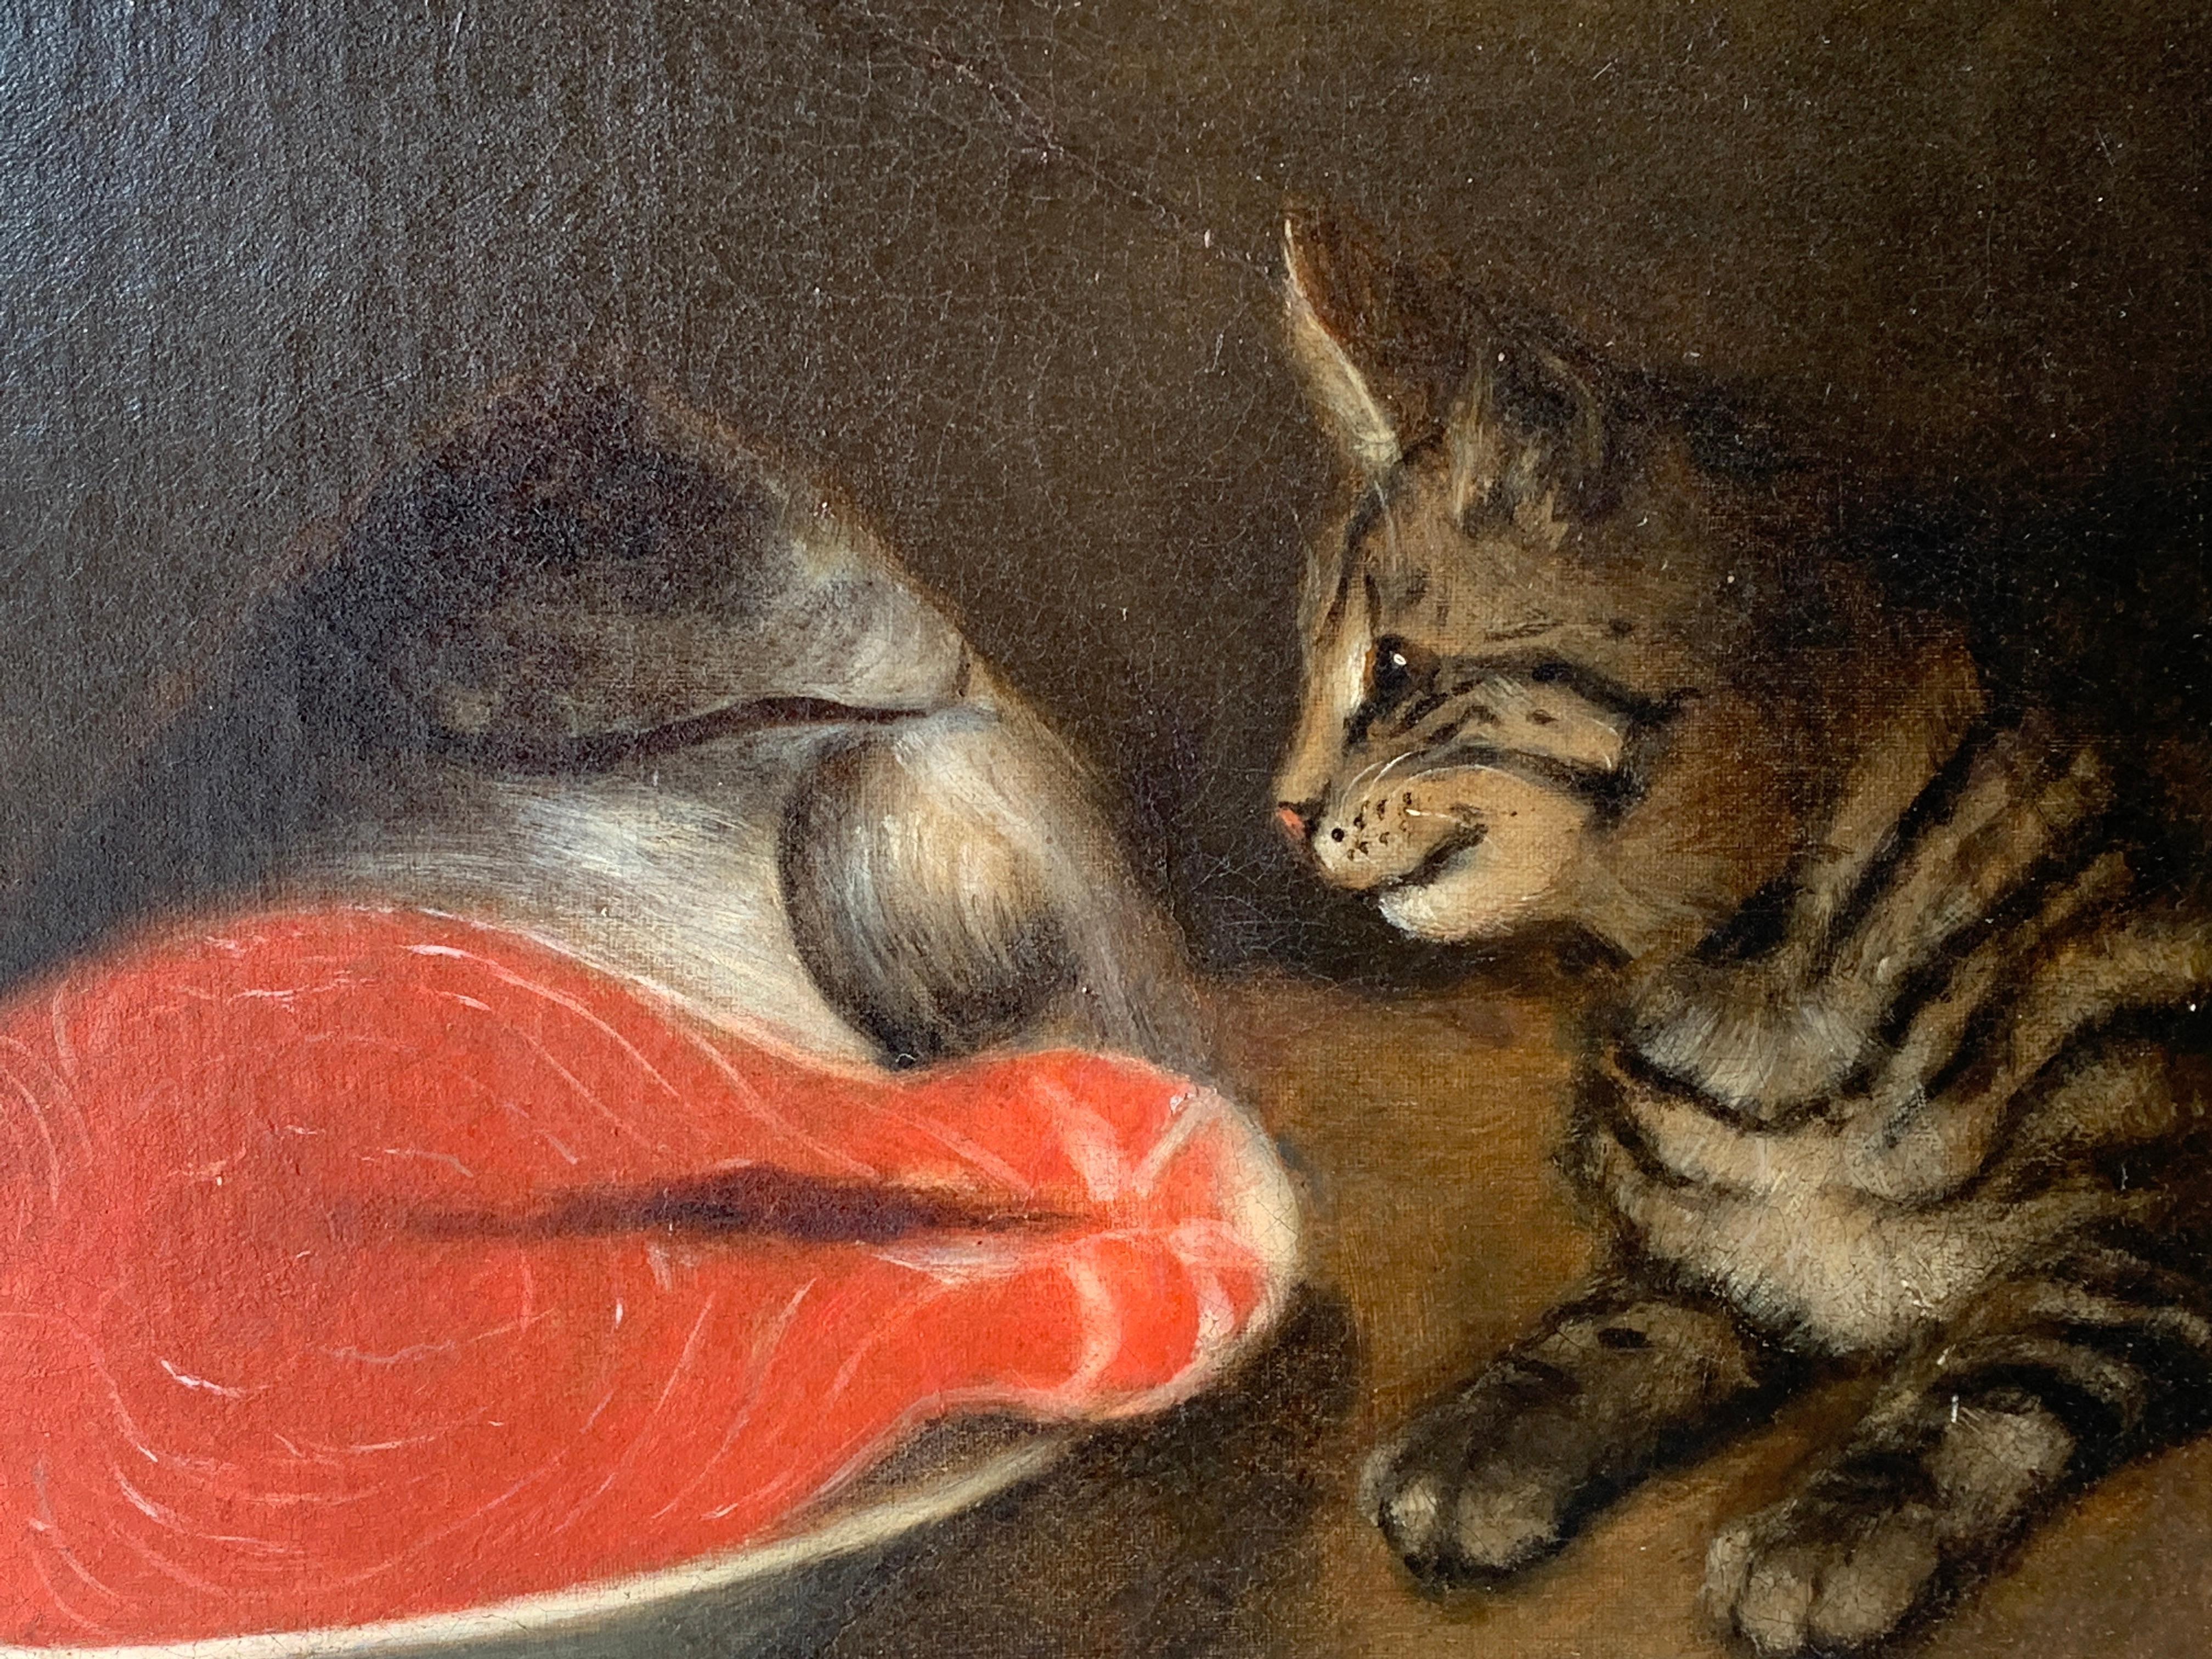 19th century English Folk Art, cat looking at with crab and fish in a bowel - Painting by Unknown